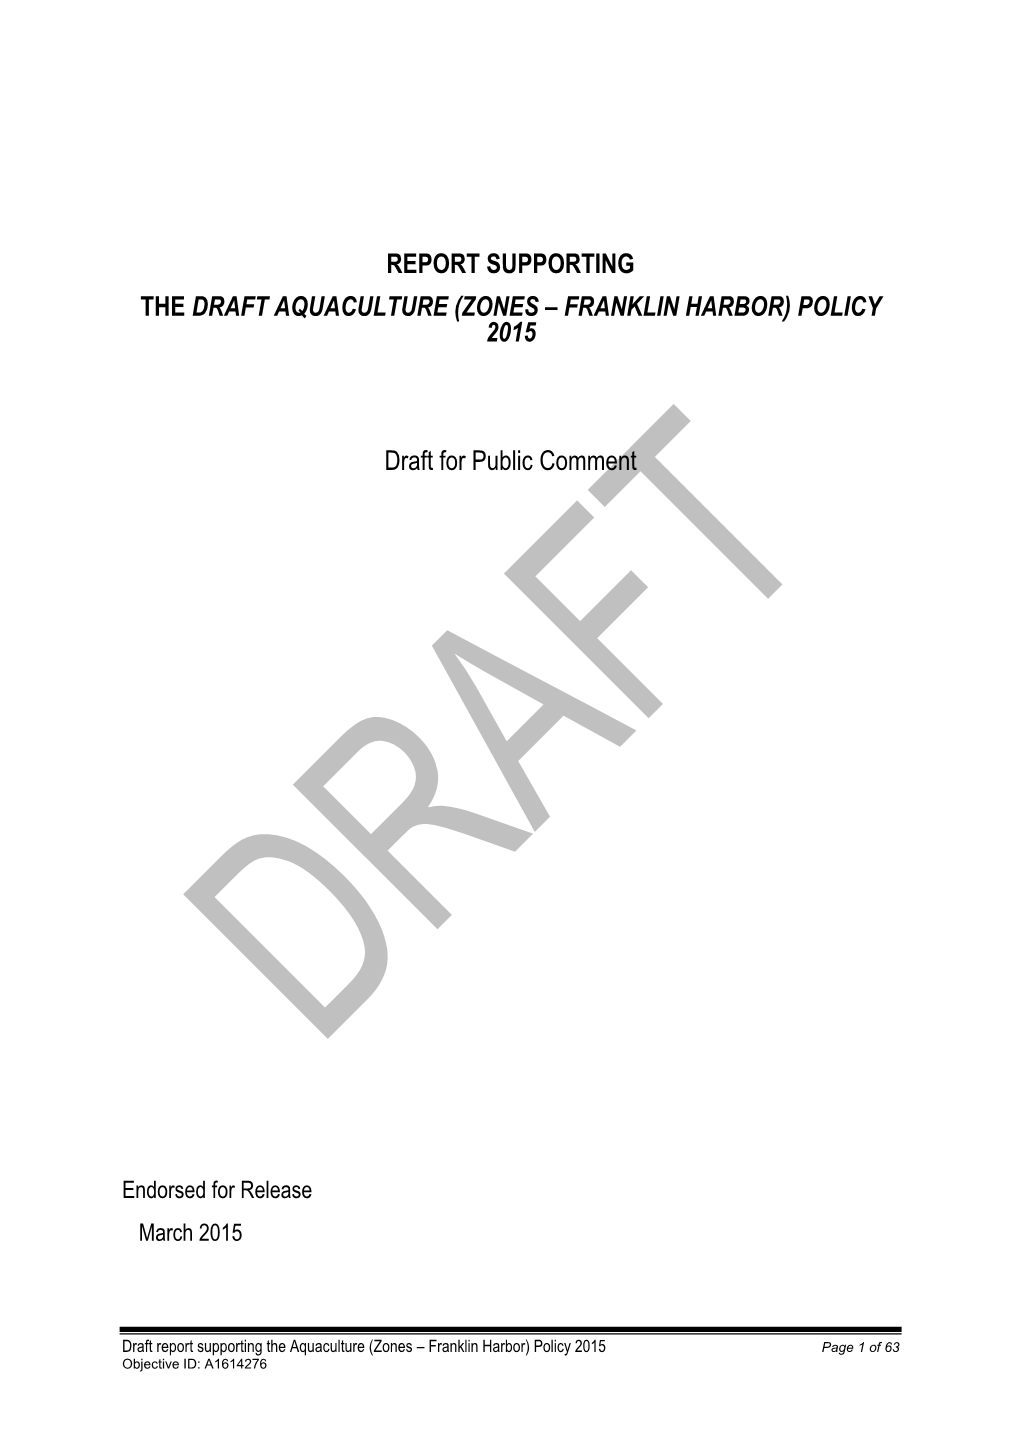 (ZONES – FRANKLIN HARBOR) POLICY 2015 Draft for Public